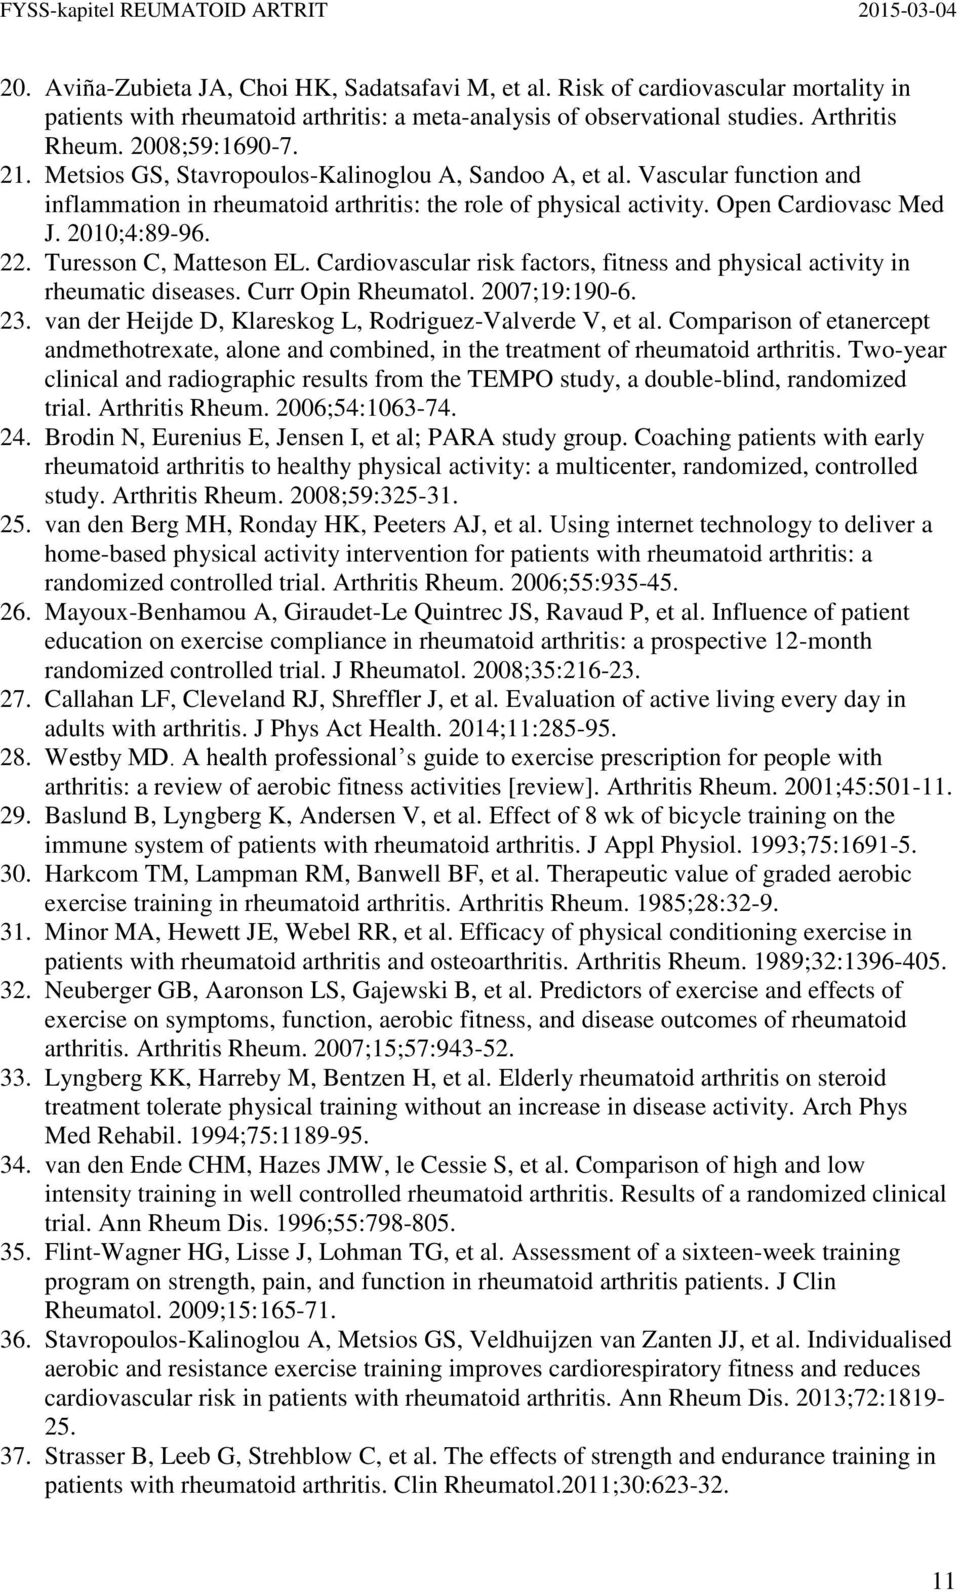 Turesson C, Matteson EL. Cardiovascular risk factors, fitness and physical activity in rheumatic diseases. Curr Opin Rheumatol. 2007;19:190-6. 23.